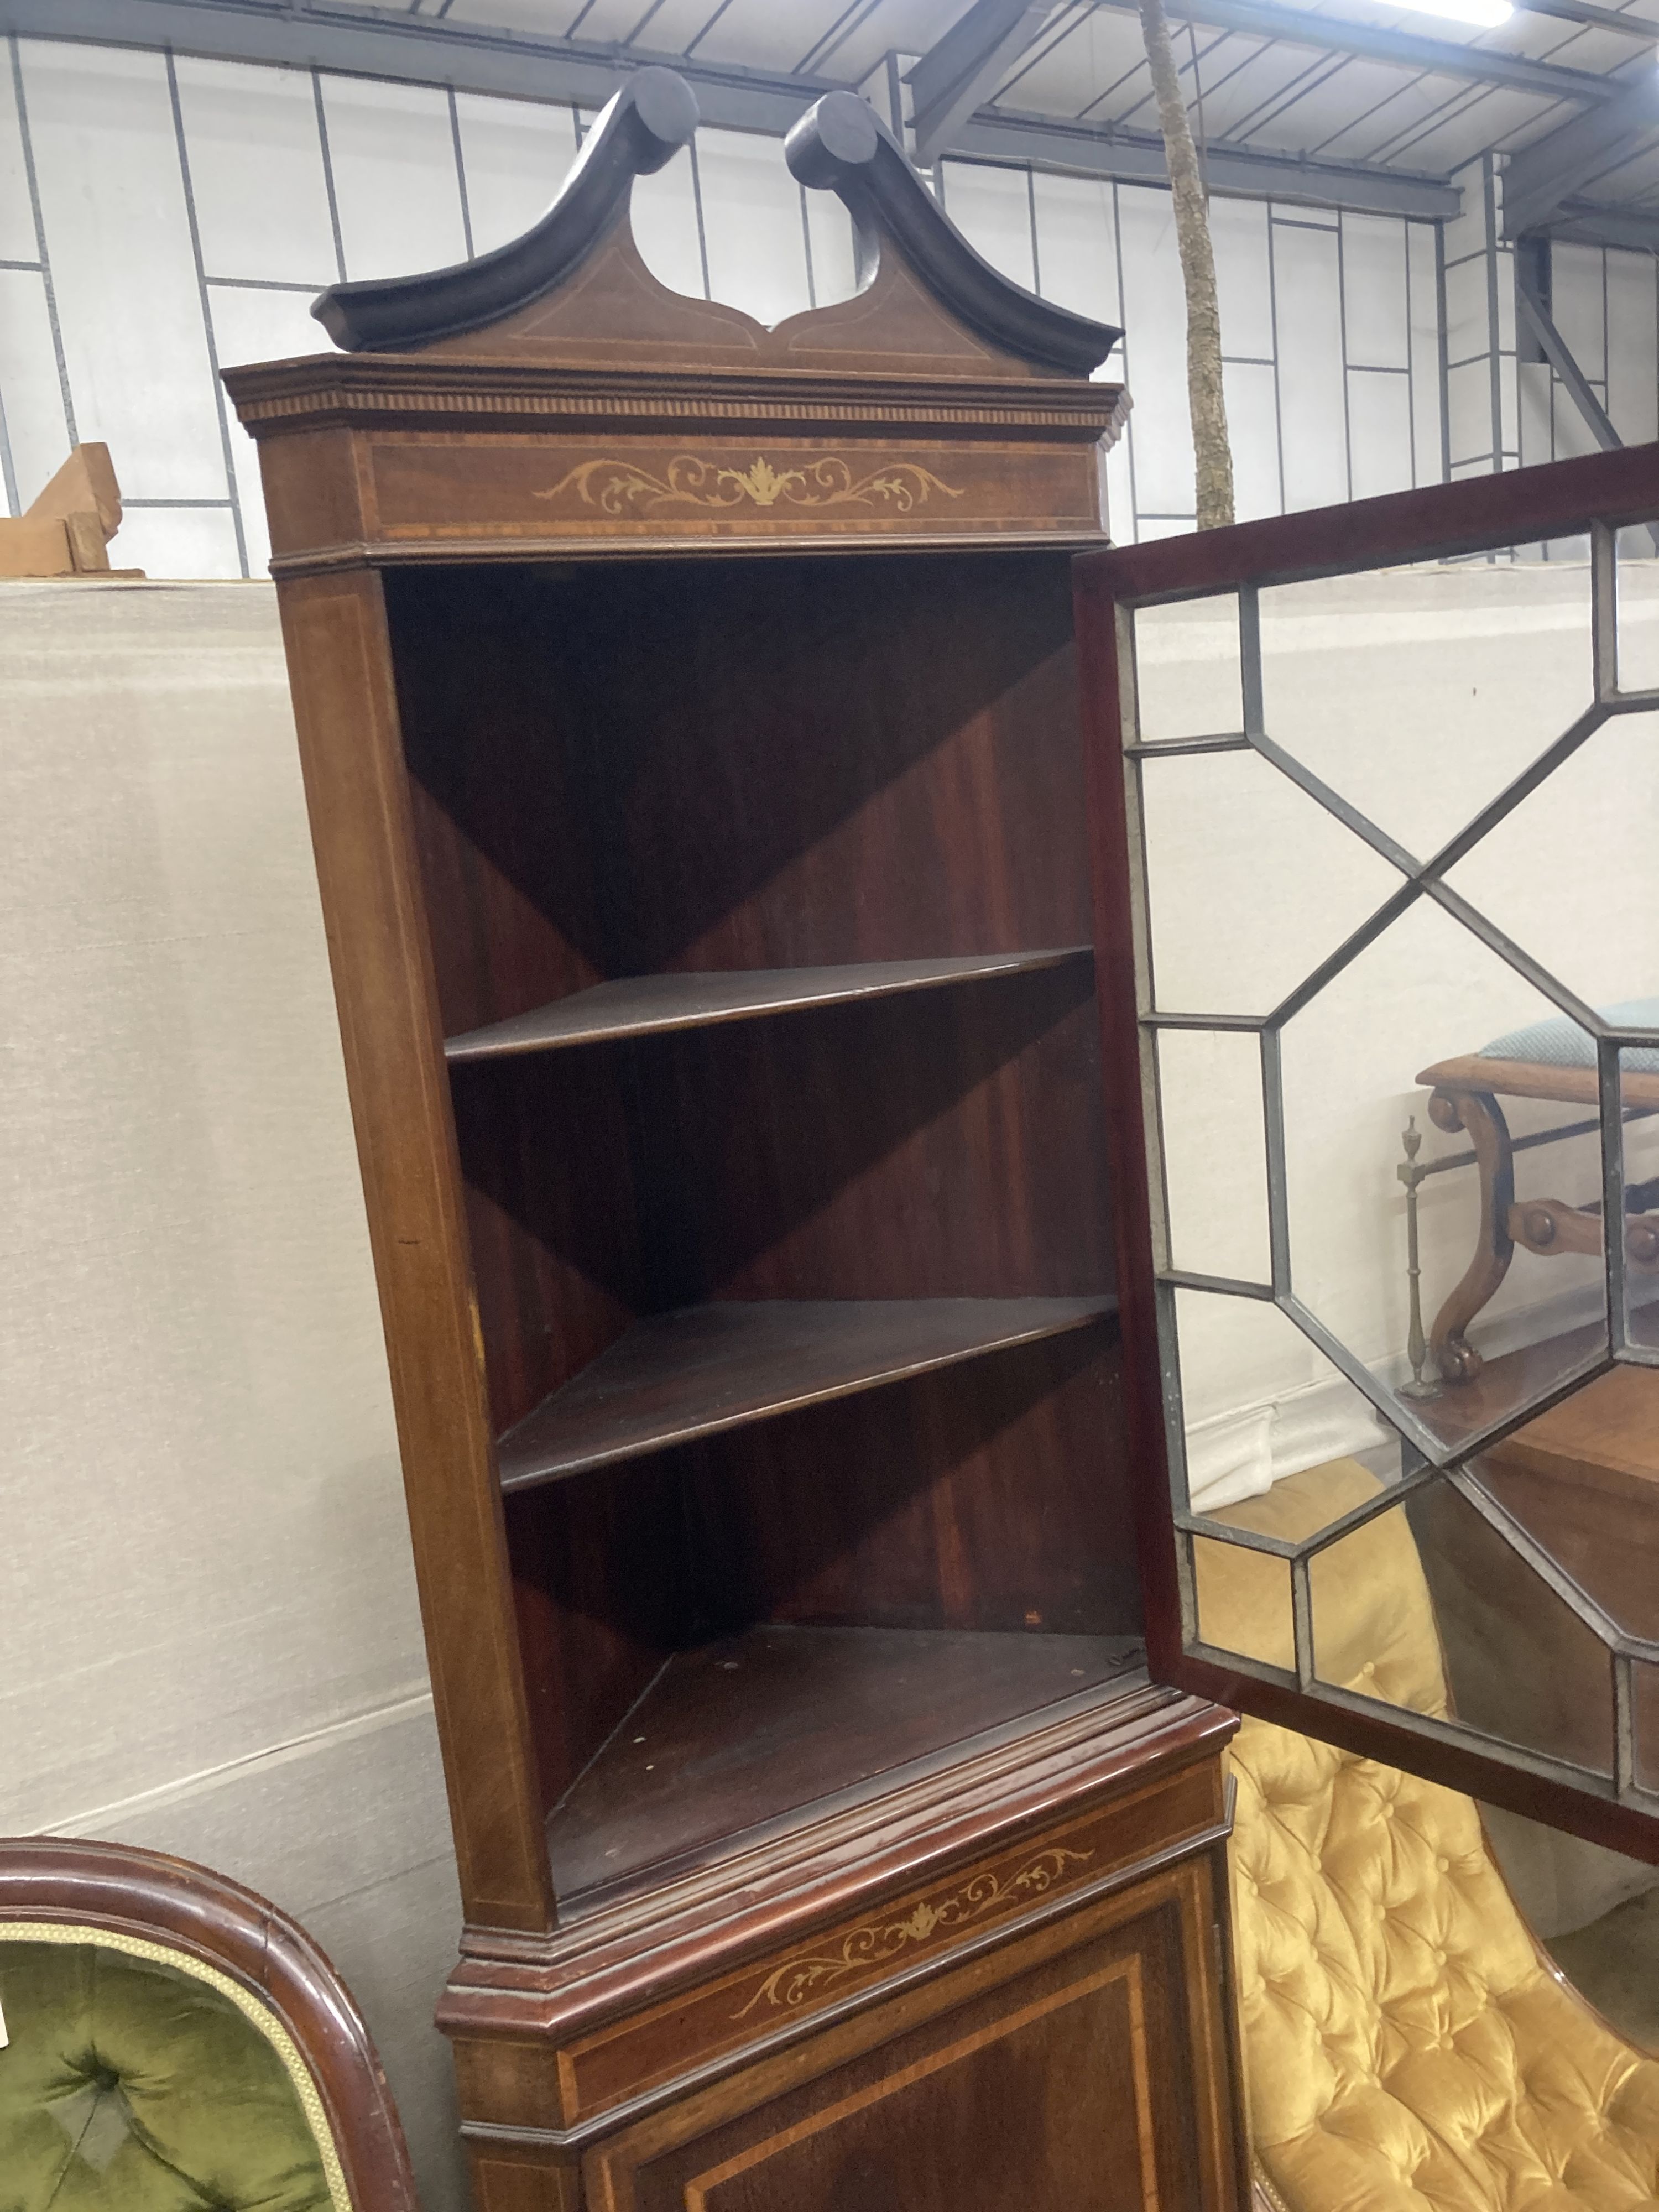 An Edwardian marquetry inlaid and cross banded mahogany standing corner cabinet, width 70cm, depth 40cm, height 205cm